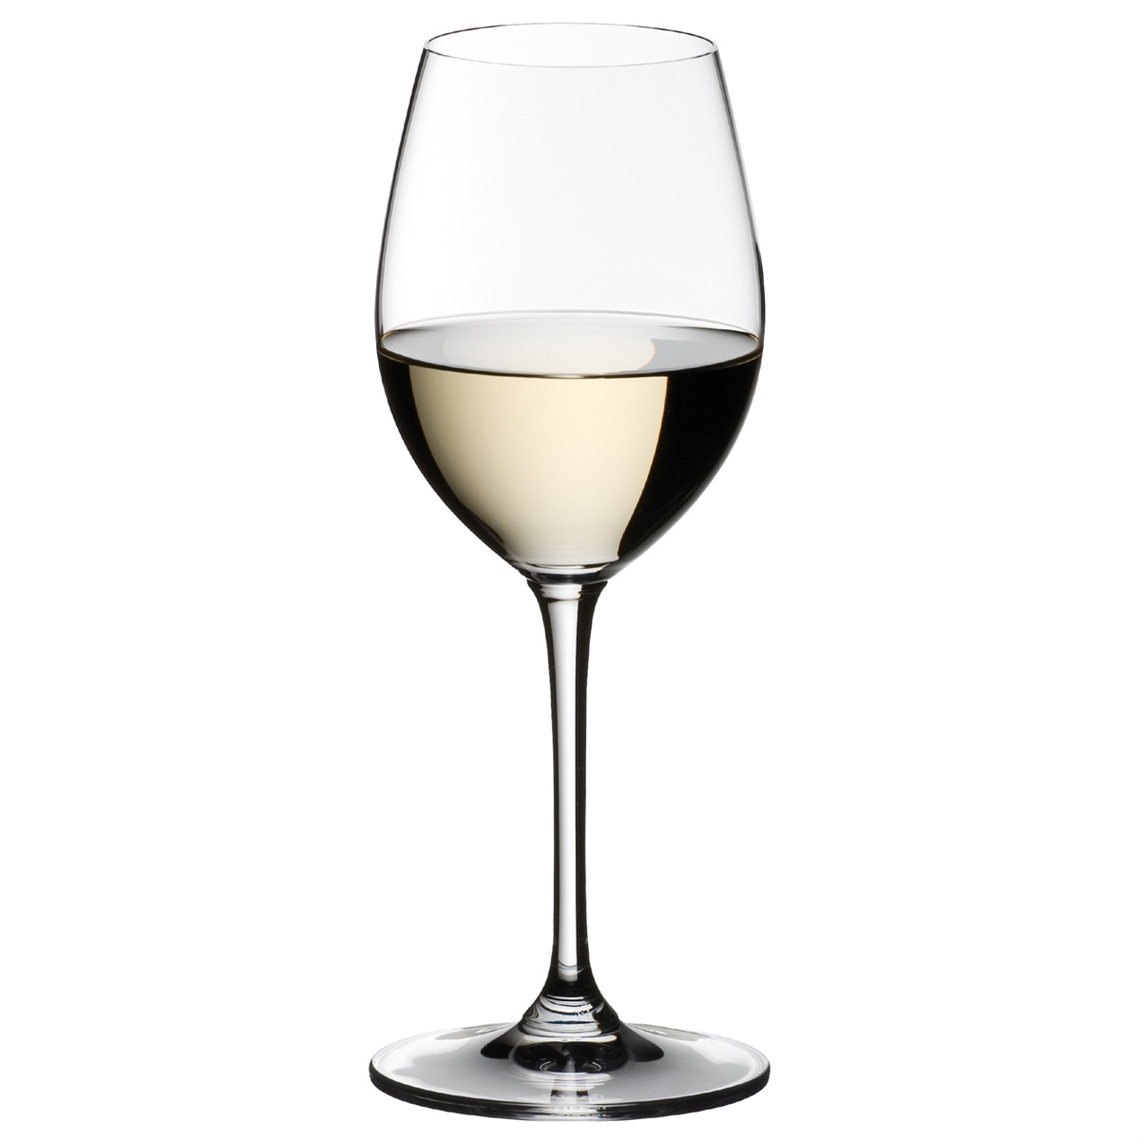 View more wine glasses from our Dessert Wine Glasses range